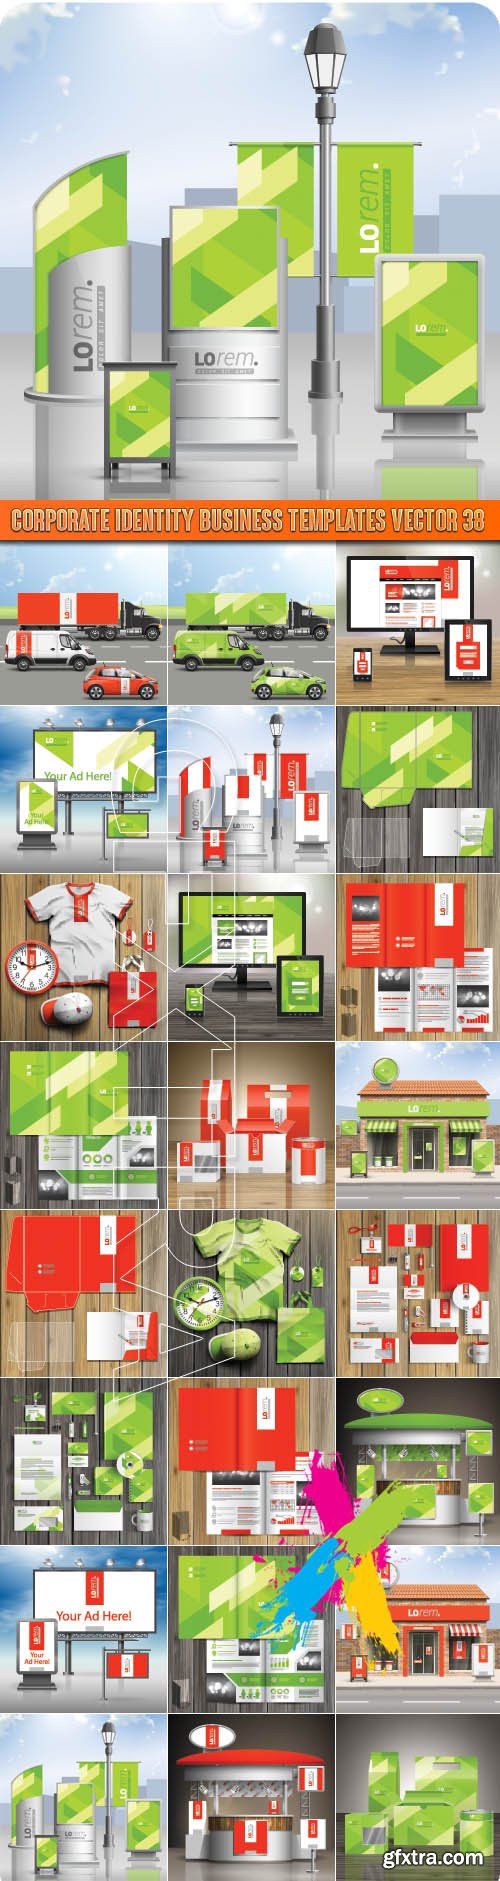 Corporate identity business templates vector 38